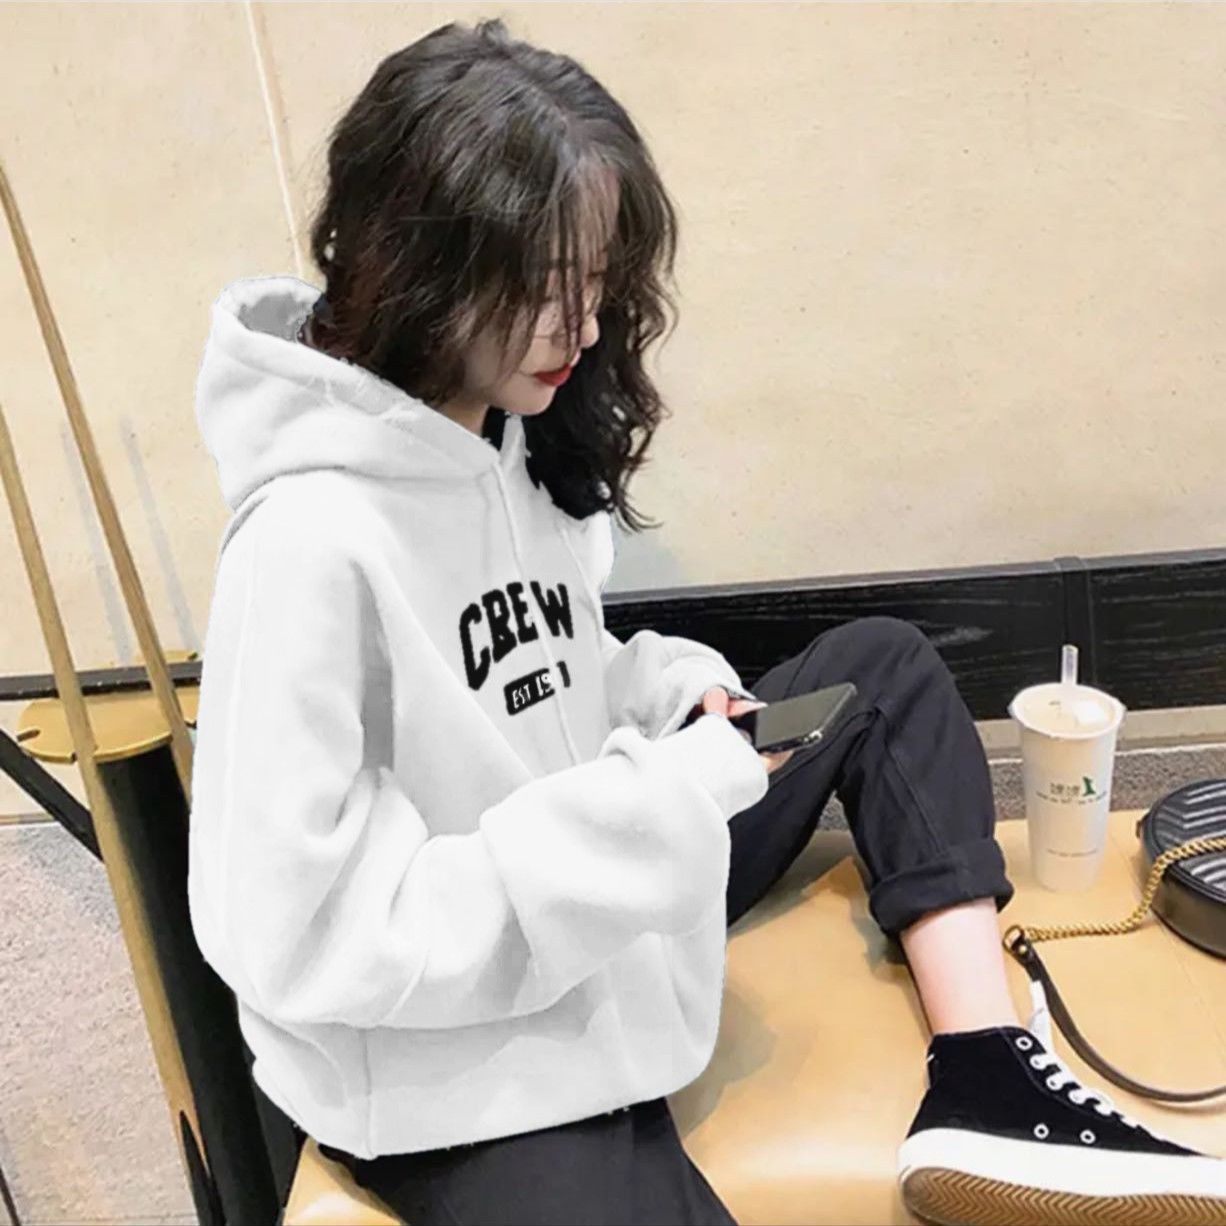 AIOUWEI American hooded sweatshirt women's pullover autumn and winter versatile casual loose ins trendy brand top for men and women